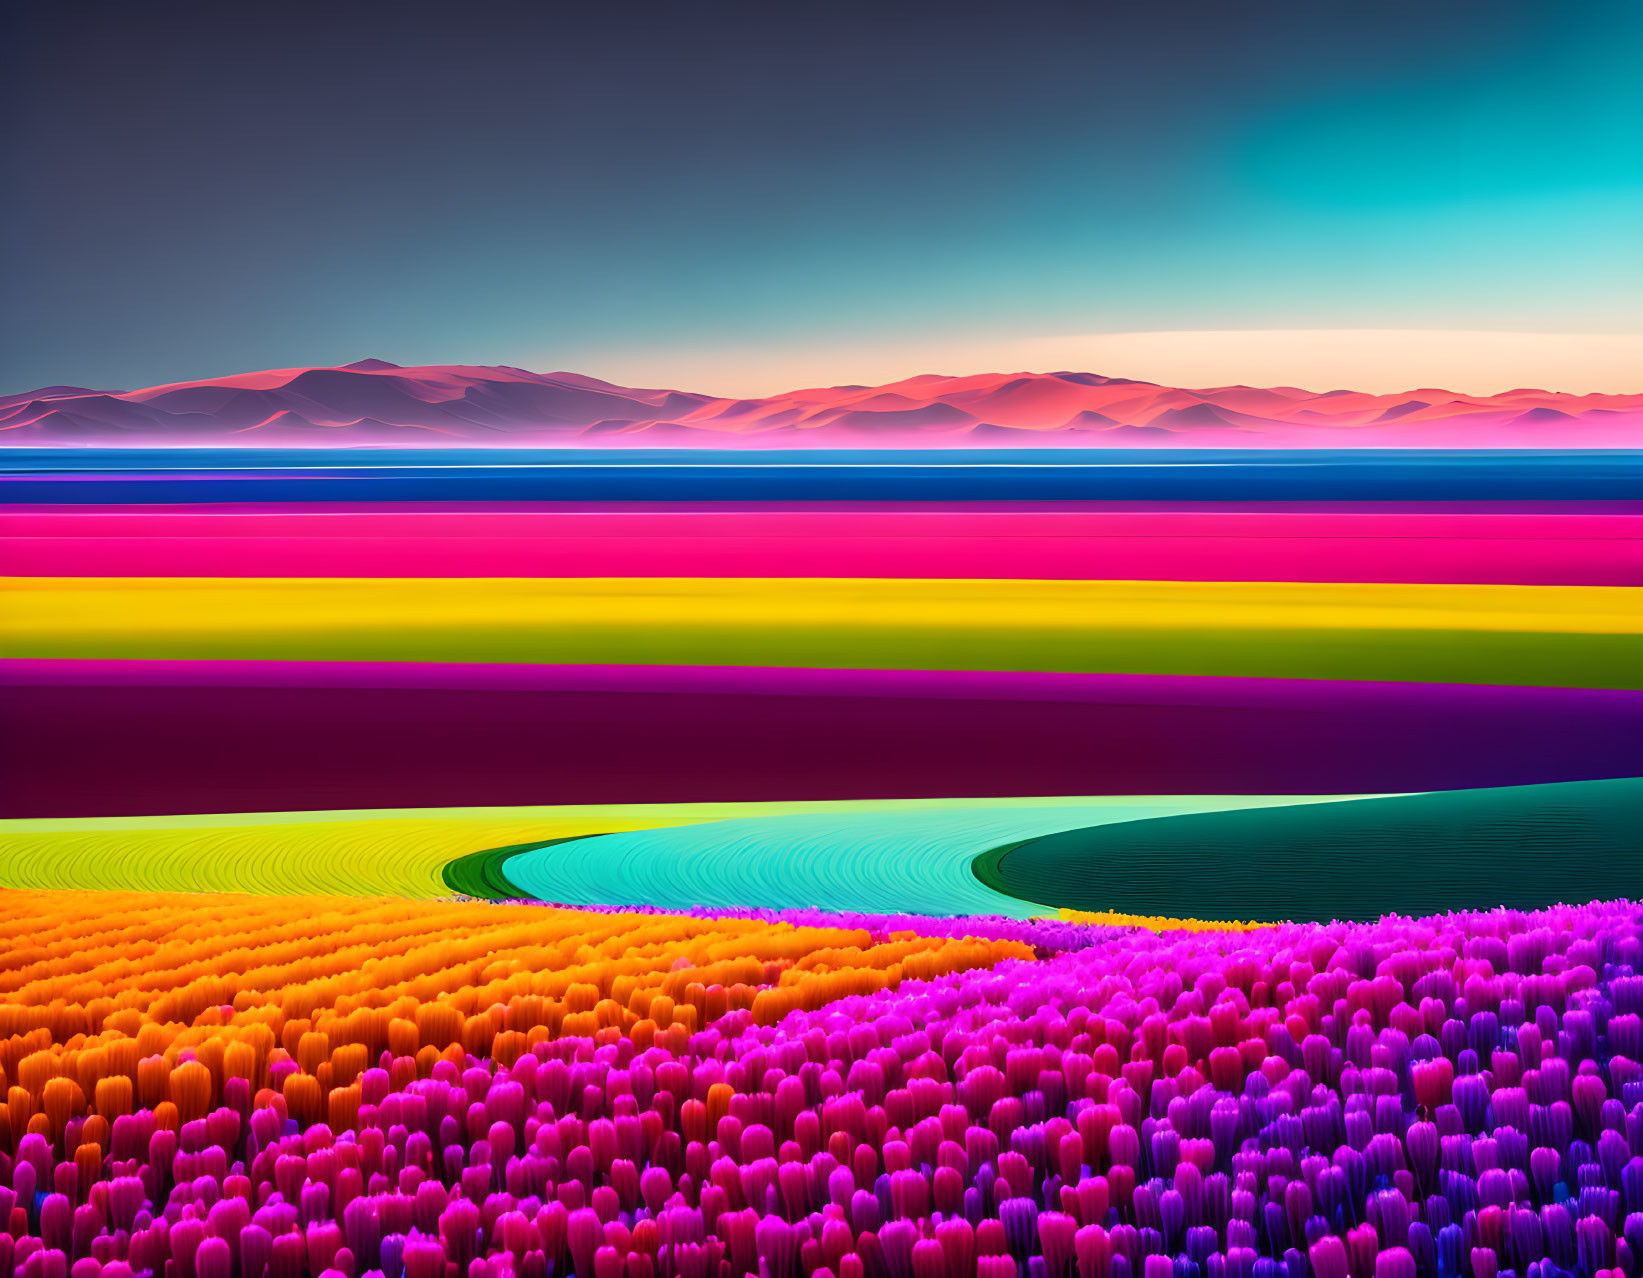 Endless field of various colors